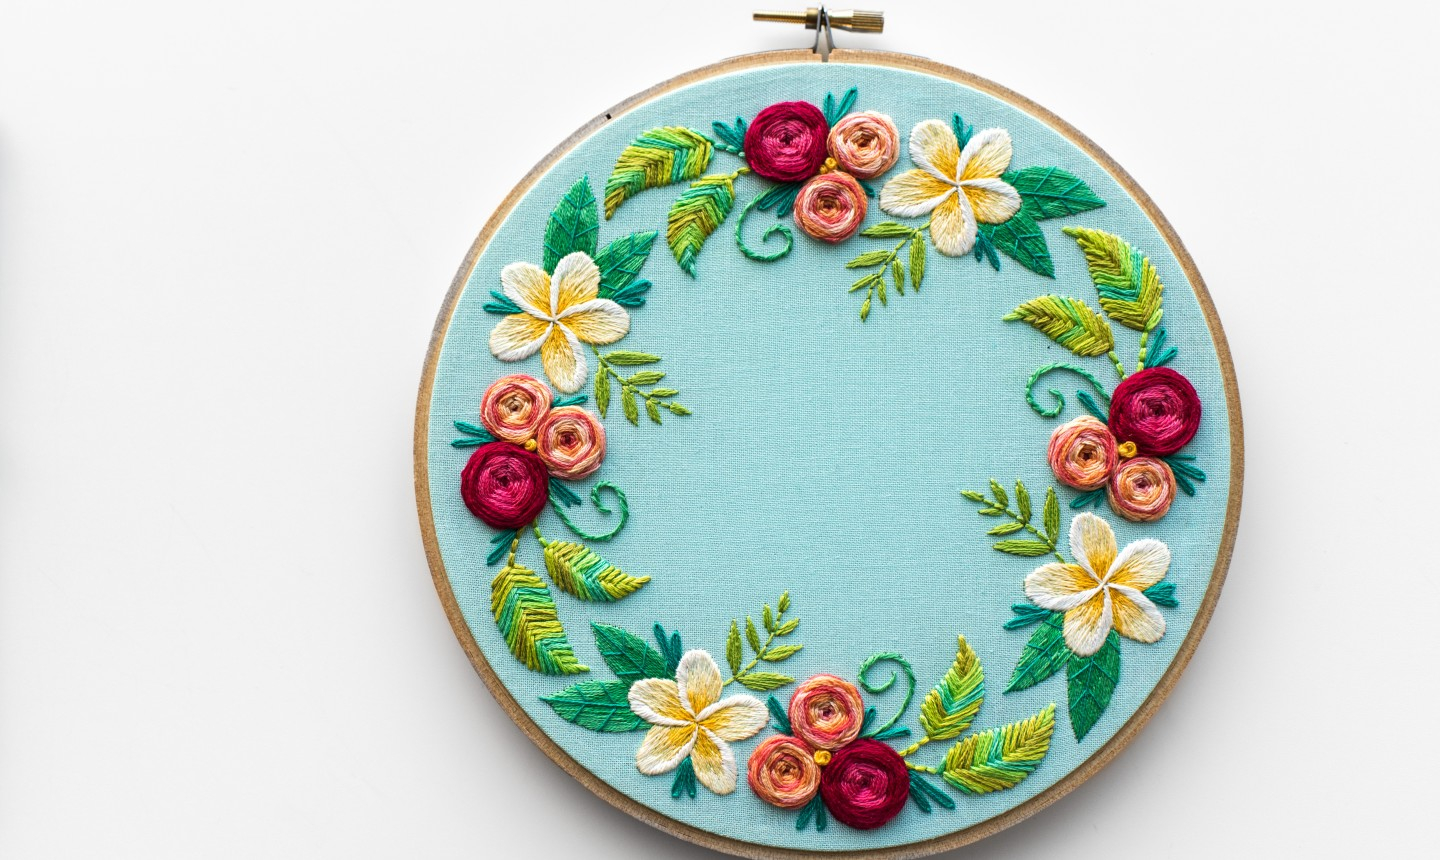 Rose Patterns For Embroidery 5 Beginner Hand Embroidery Projects